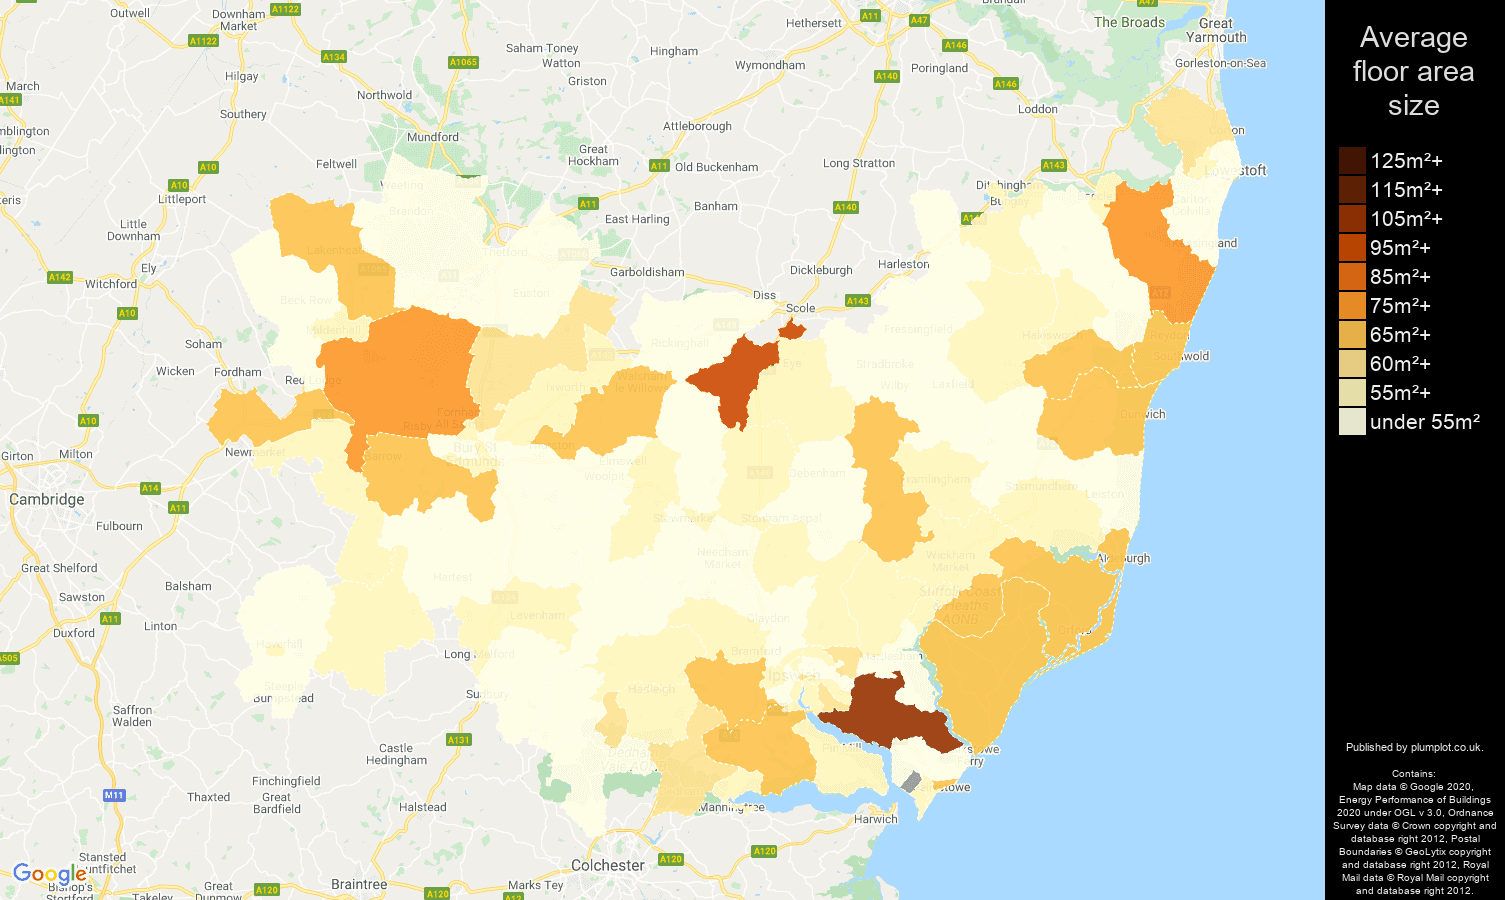 Suffolk map of average floor area size of flats